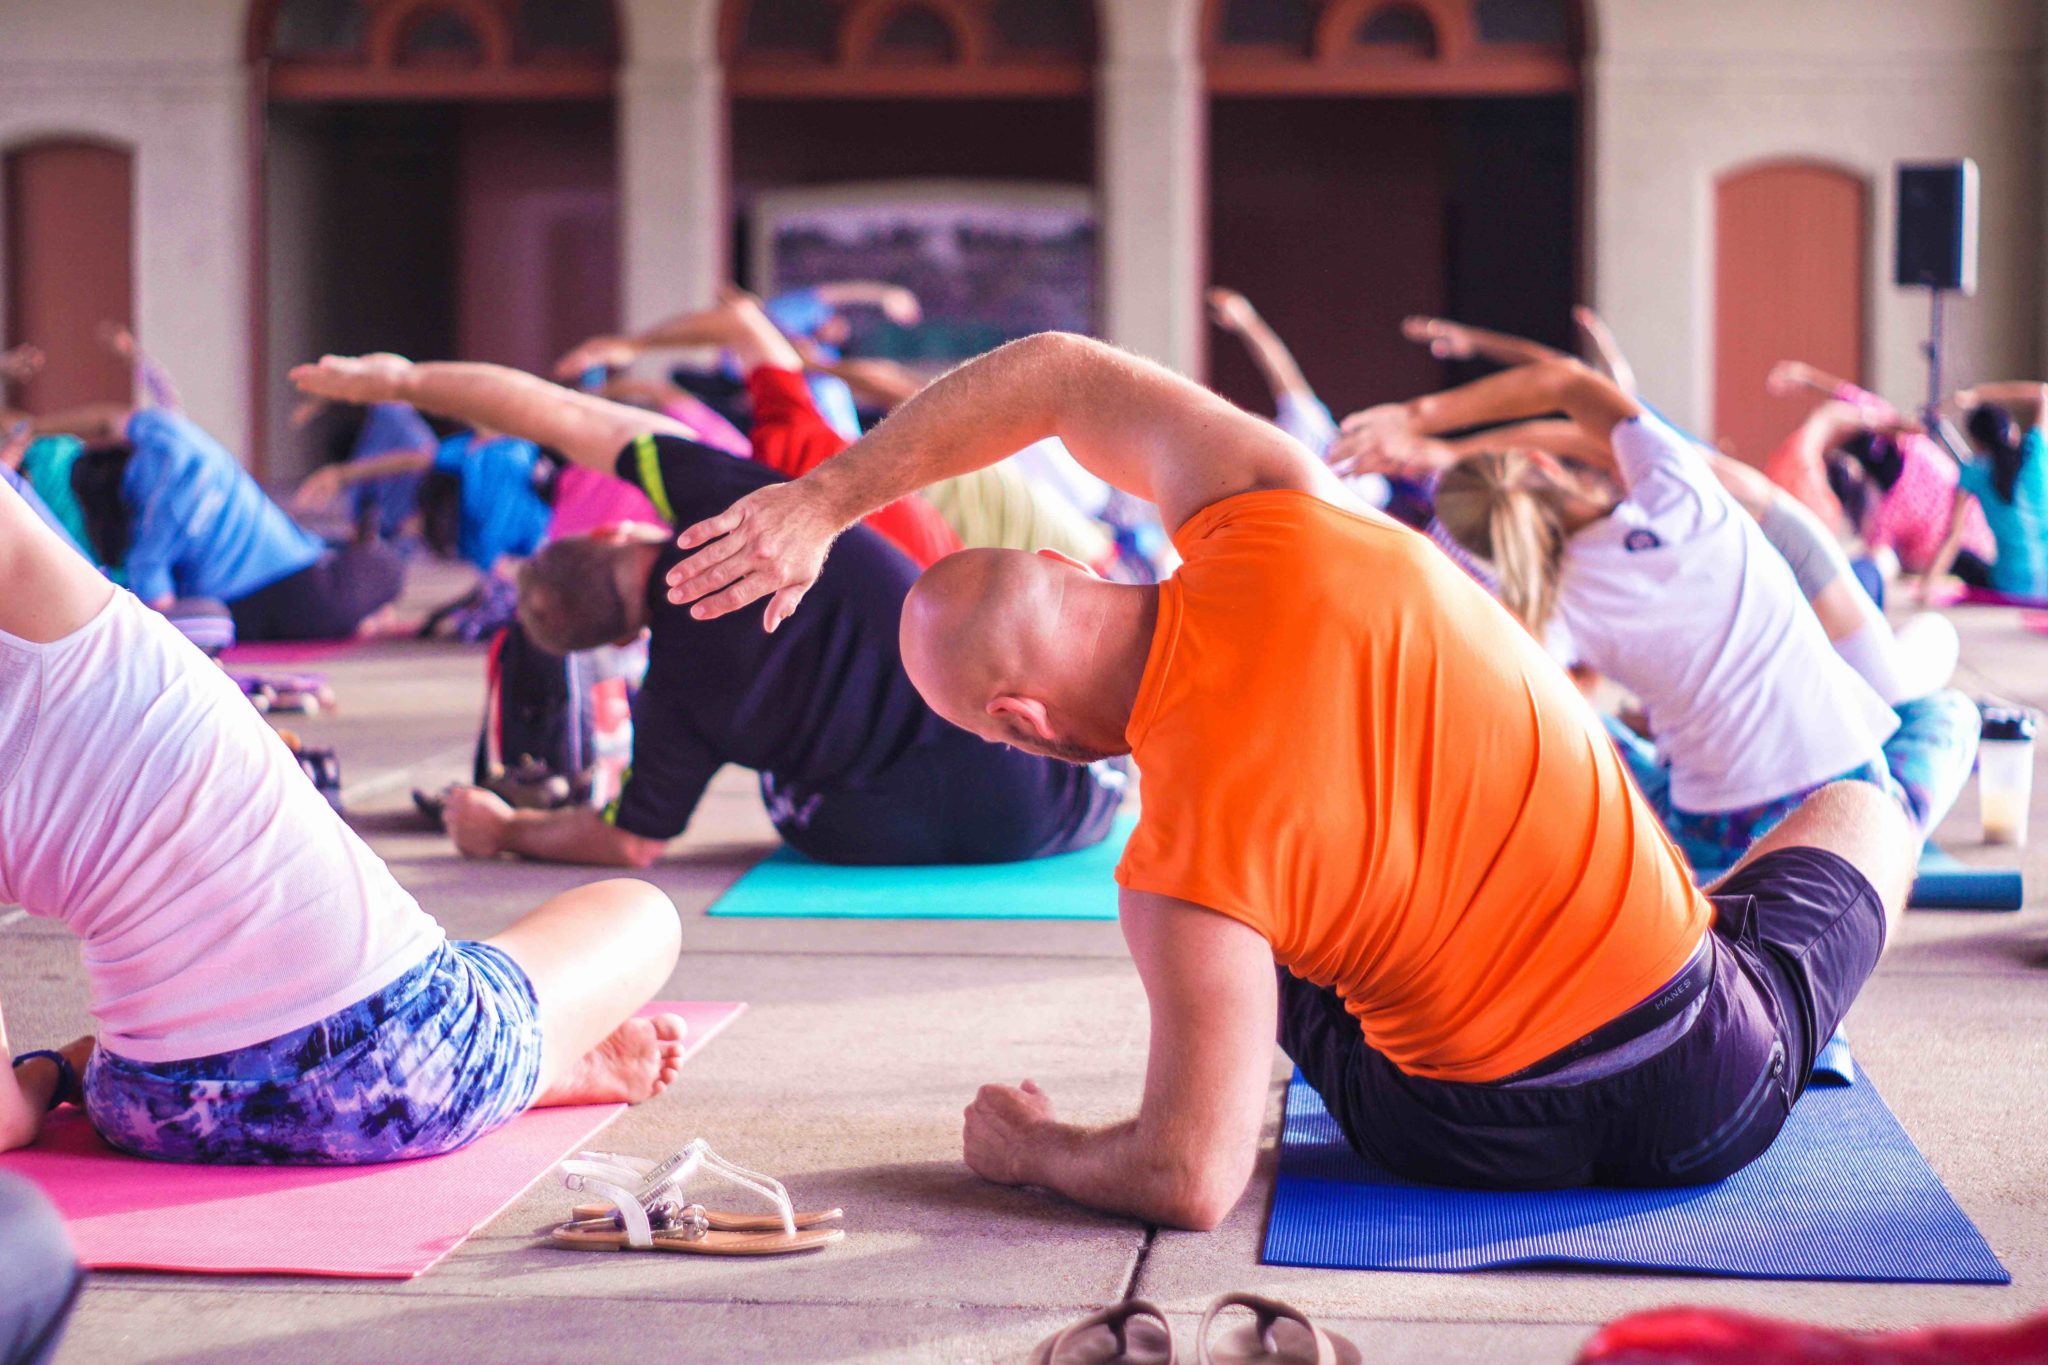 rows of people in bright clothing stretching on yoga mats